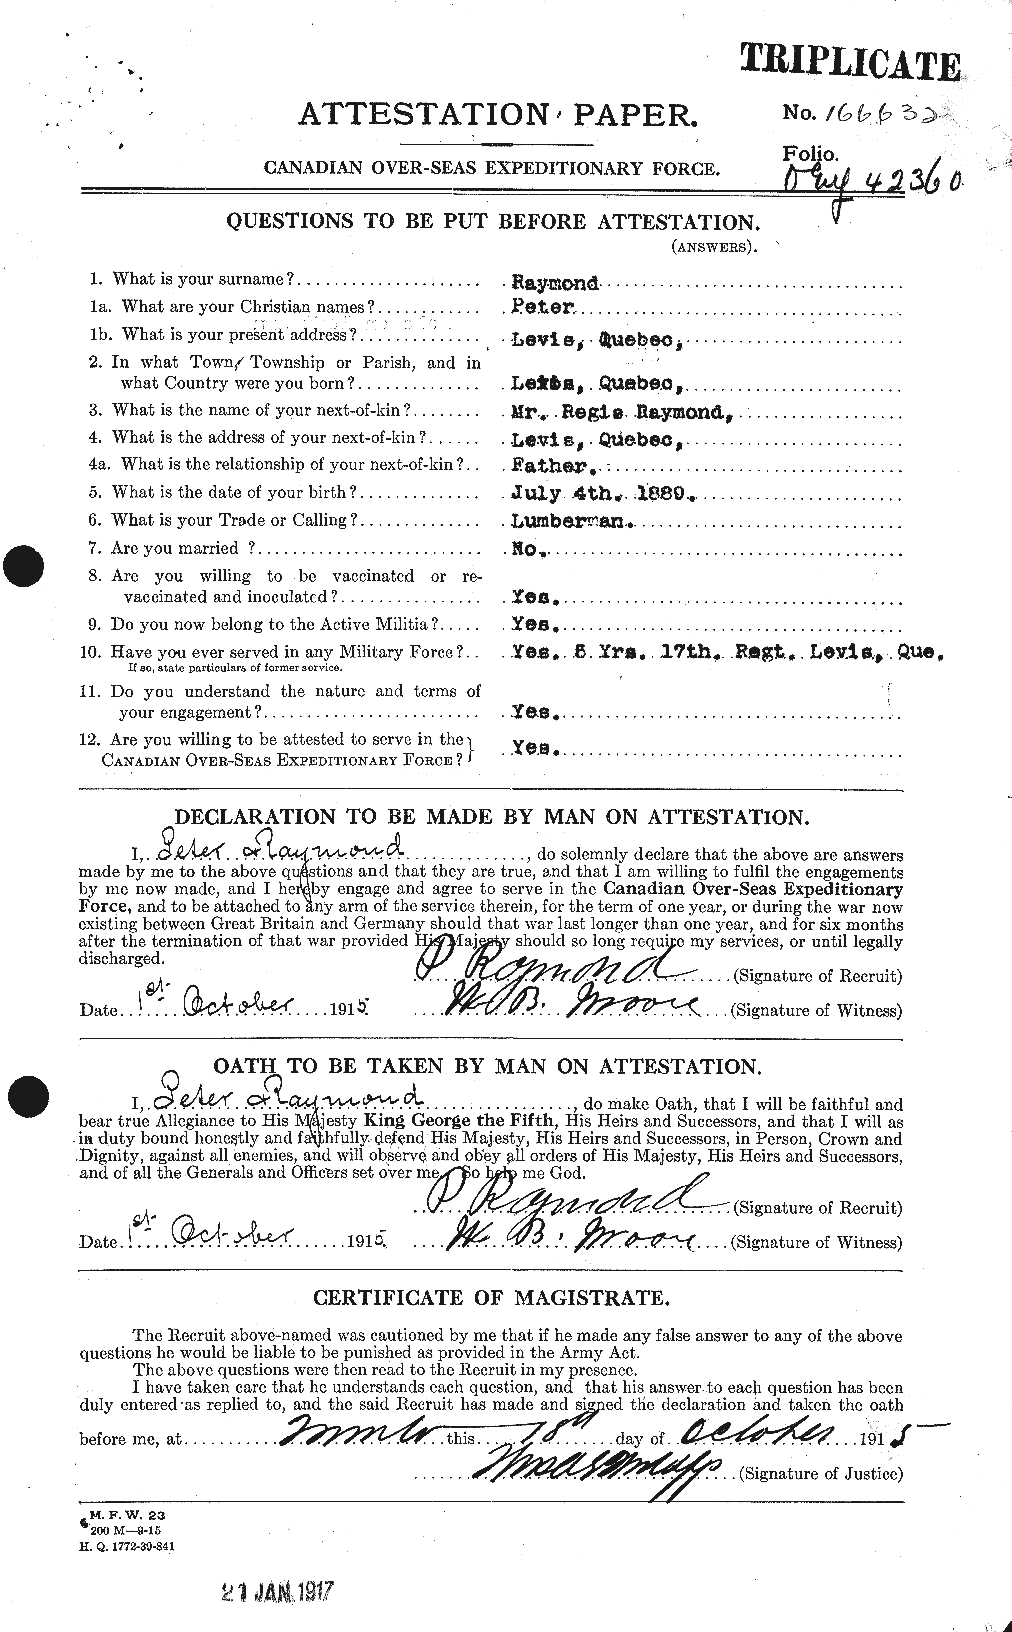 Personnel Records of the First World War - CEF 595437a